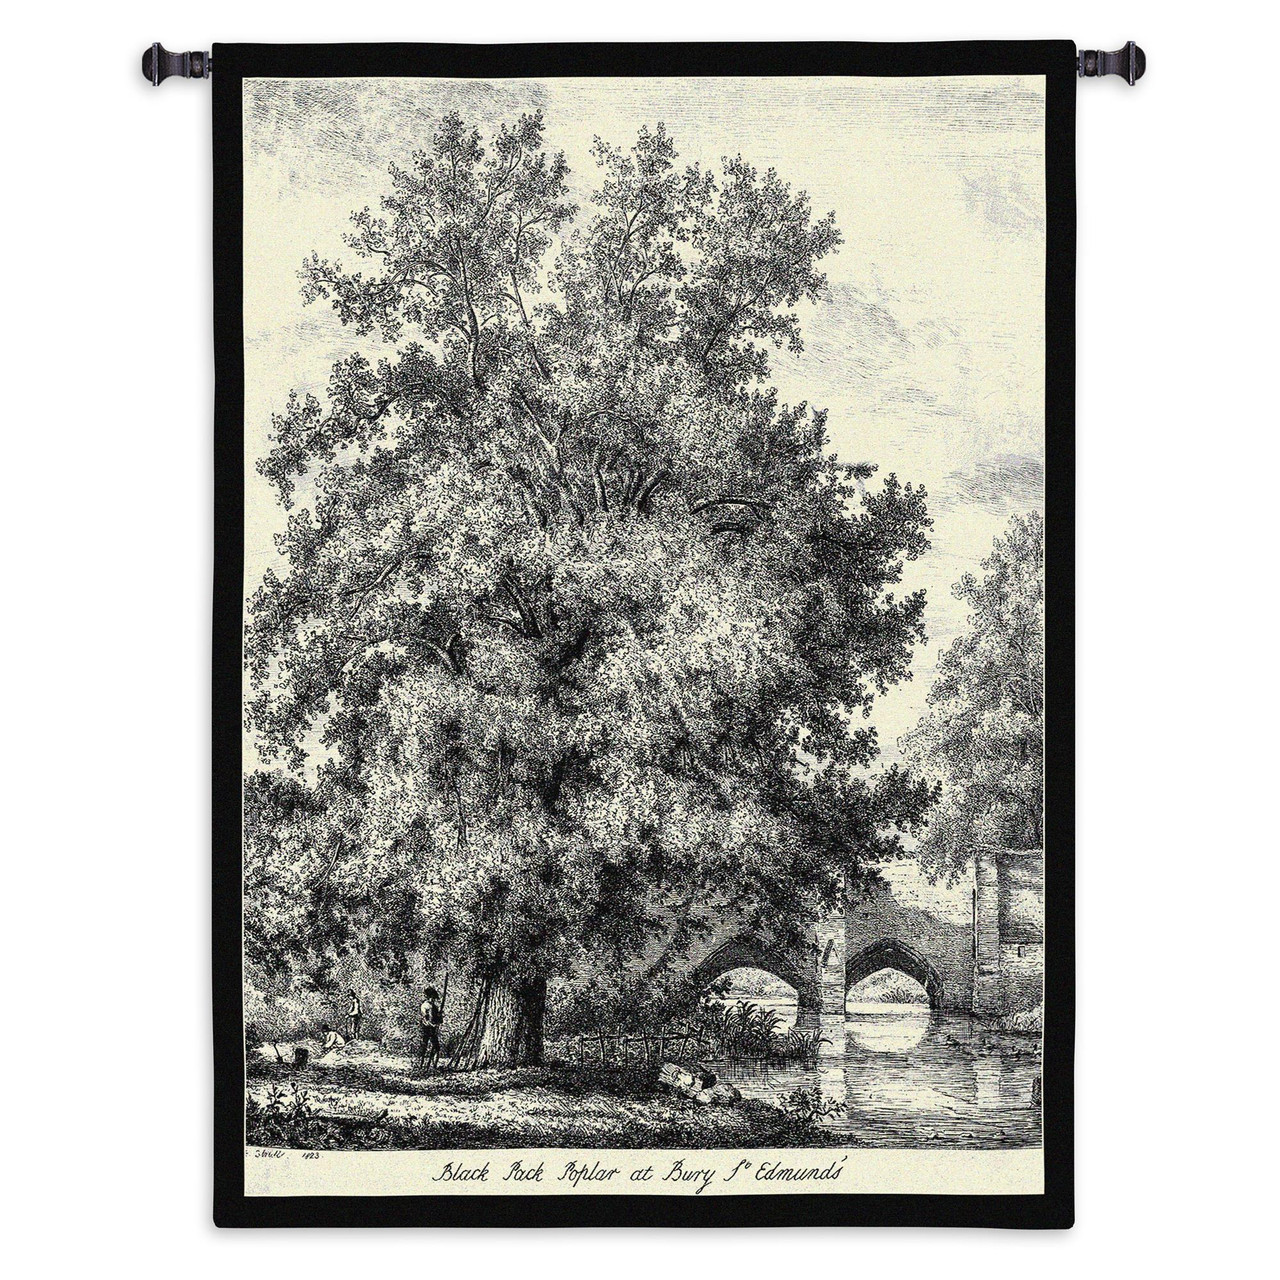 Black Poplar by Jacob George Strutt Woven Tapestry Wall Art Hanging  Elaborate Black and White Tree at River Bridge 100% Cotton USA Size 53x40